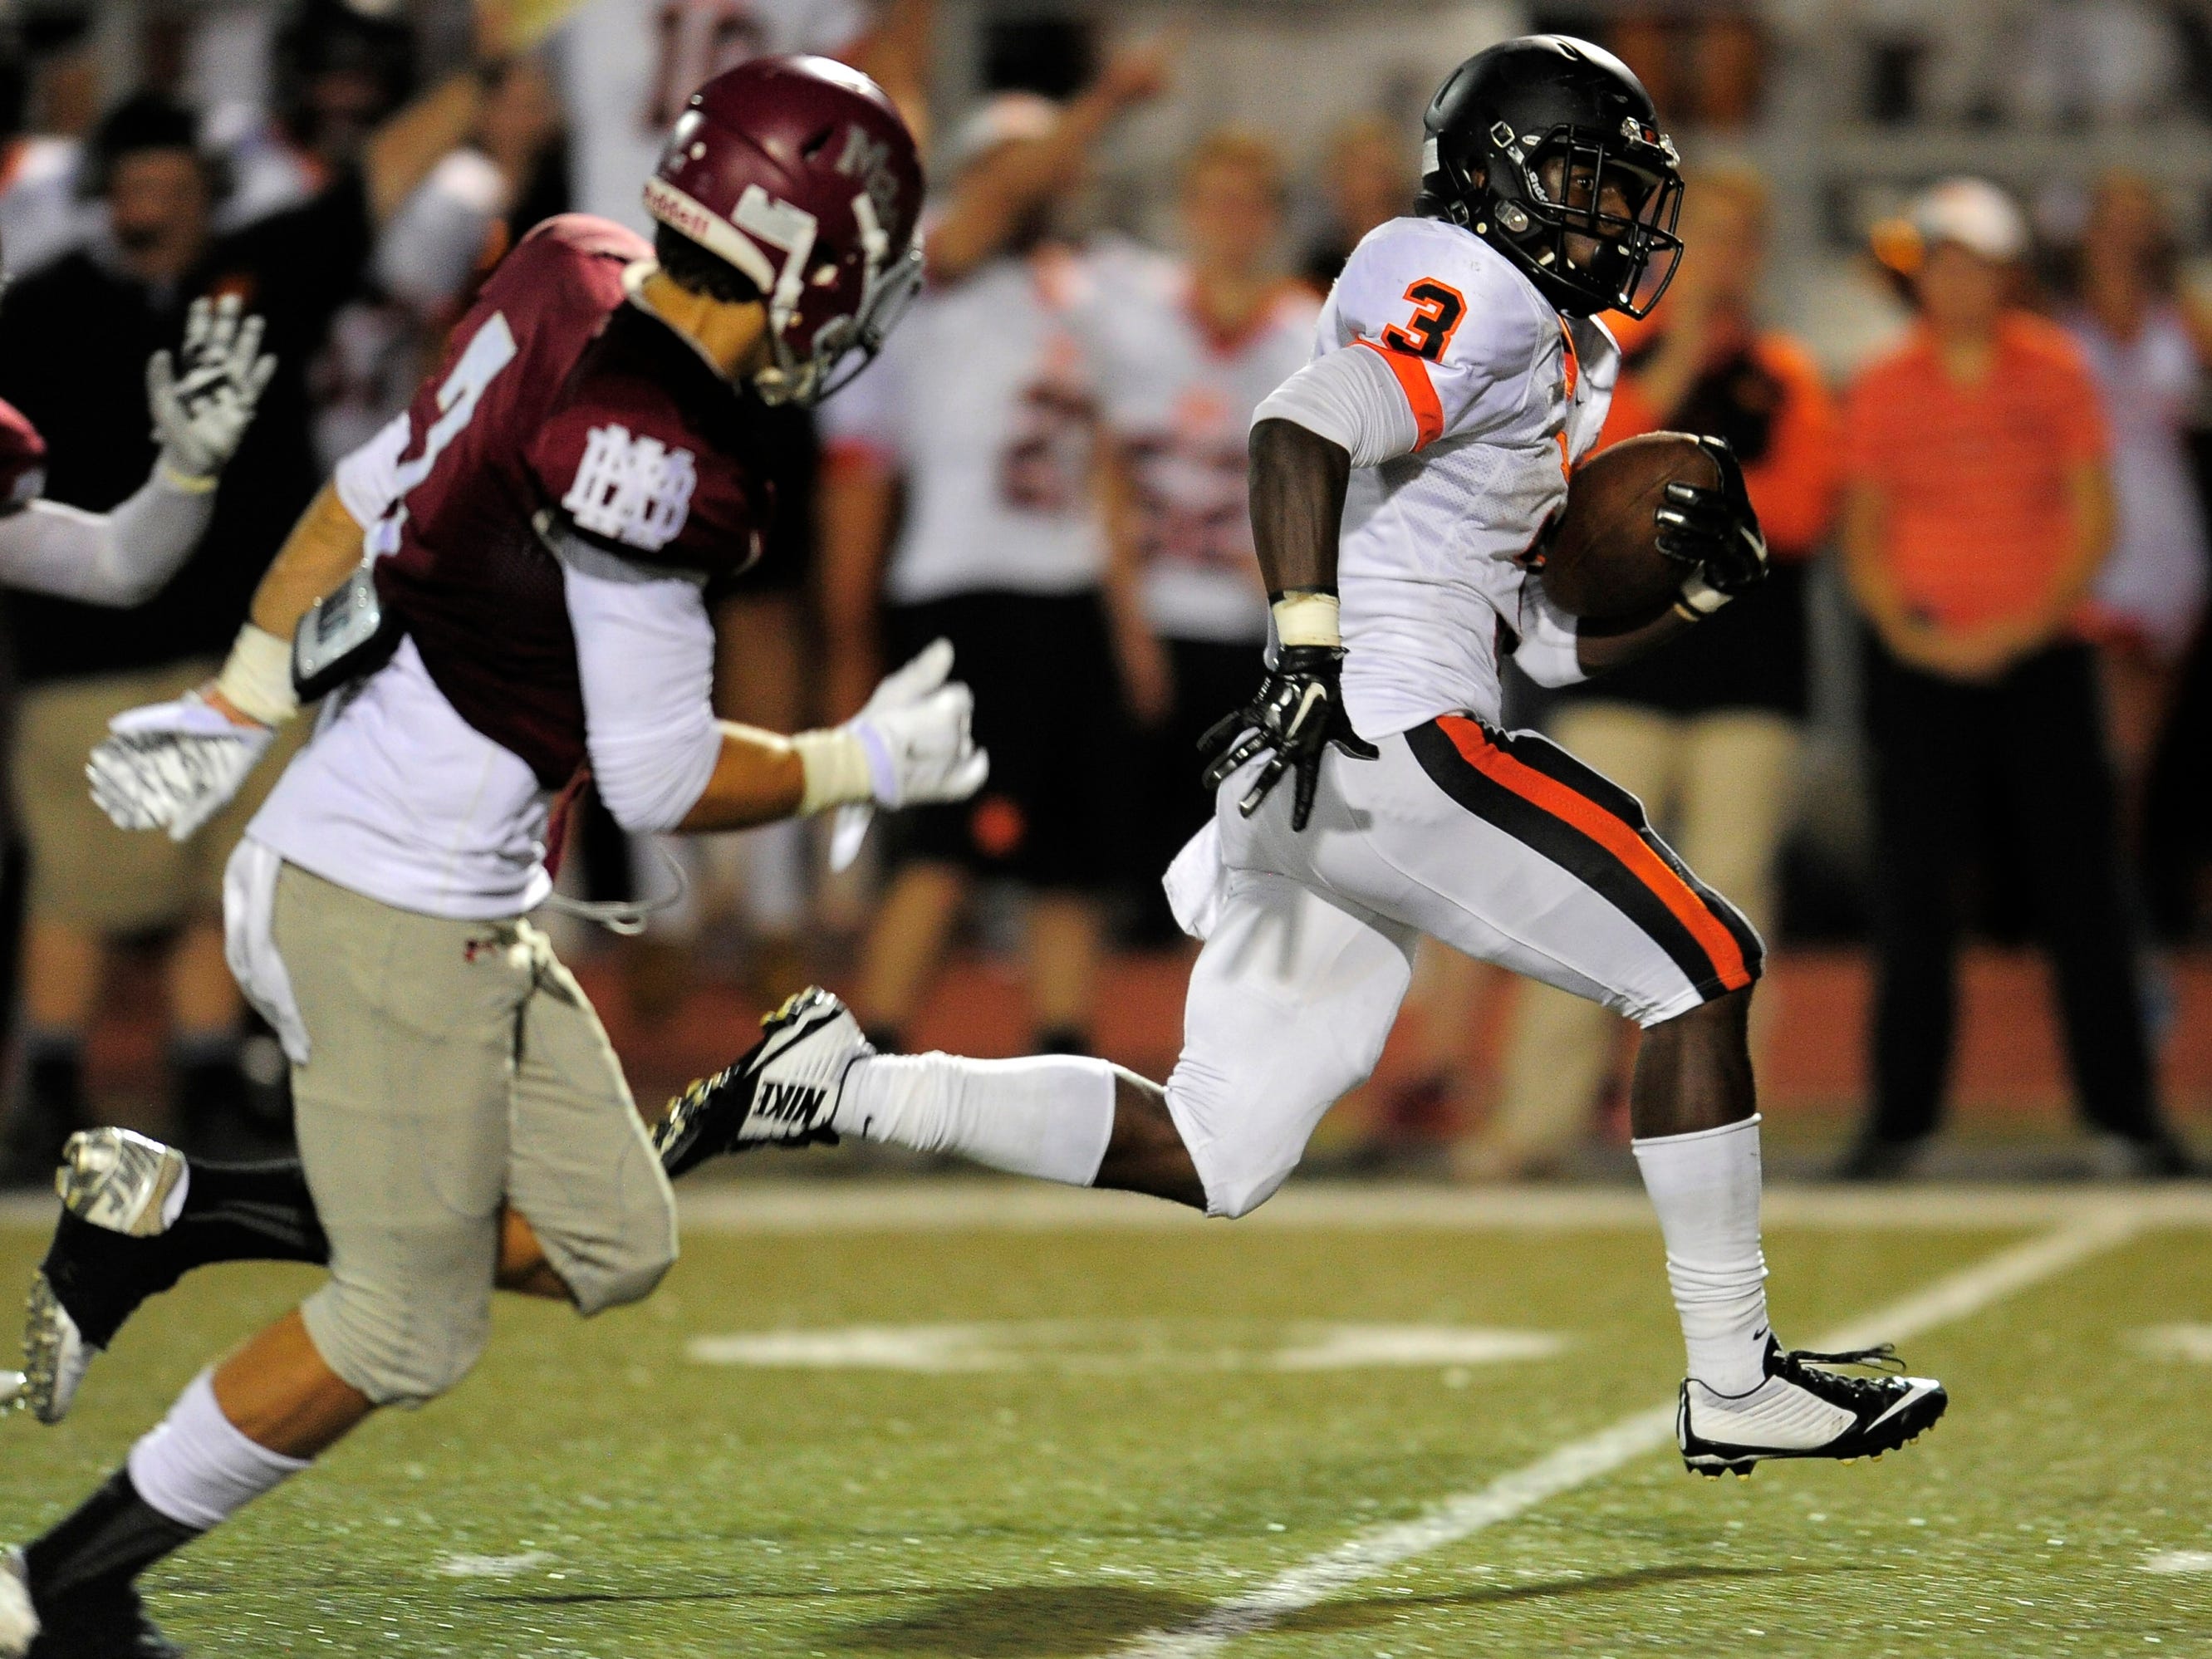 Ensworth running back Darius Morehead speeds past the MBA defense for a touchdown in the second half Thursday.